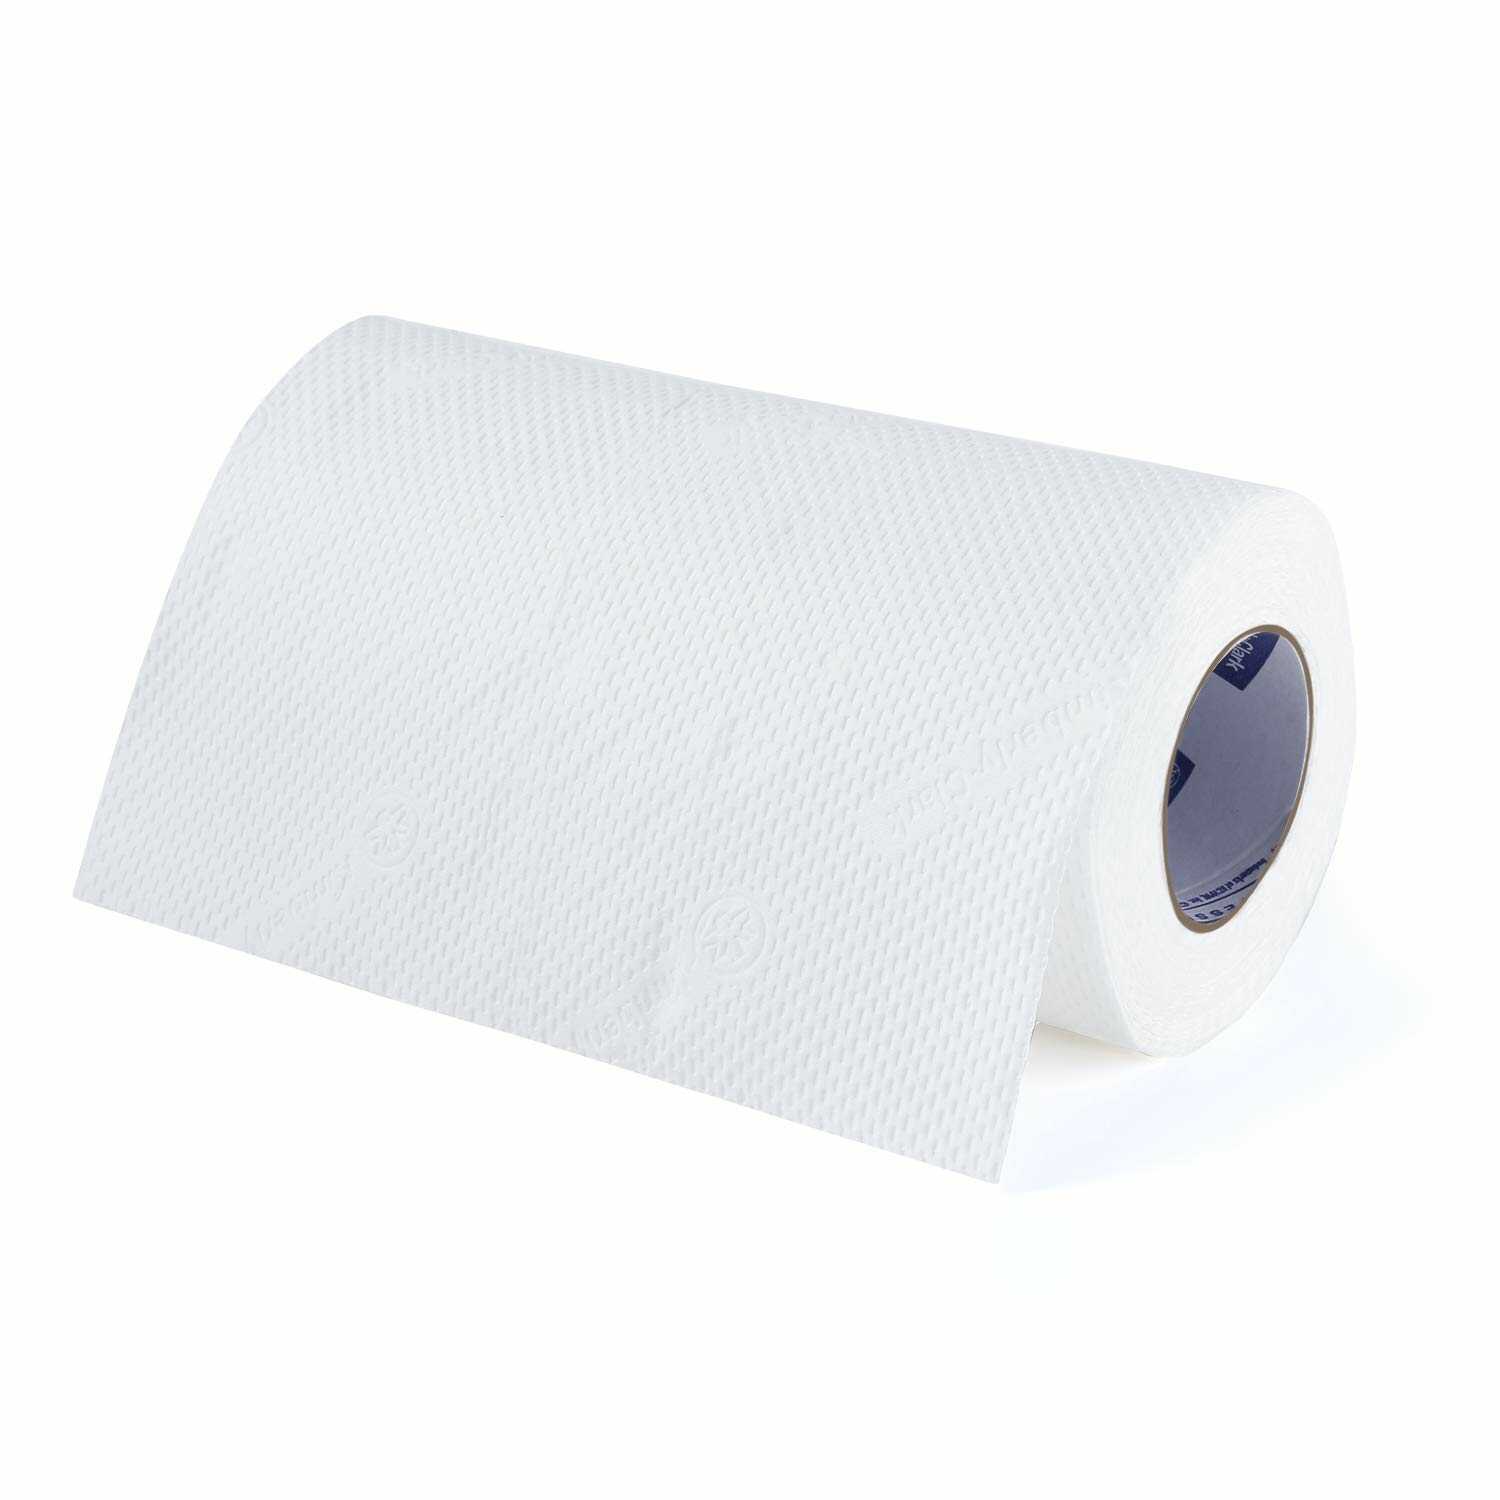 Kimberly Clark* Scott® Kitchen Roll, 1304 (Pack of 50 Roll/Case, 125 Sheets/Roll, Total 6250 Sheets)